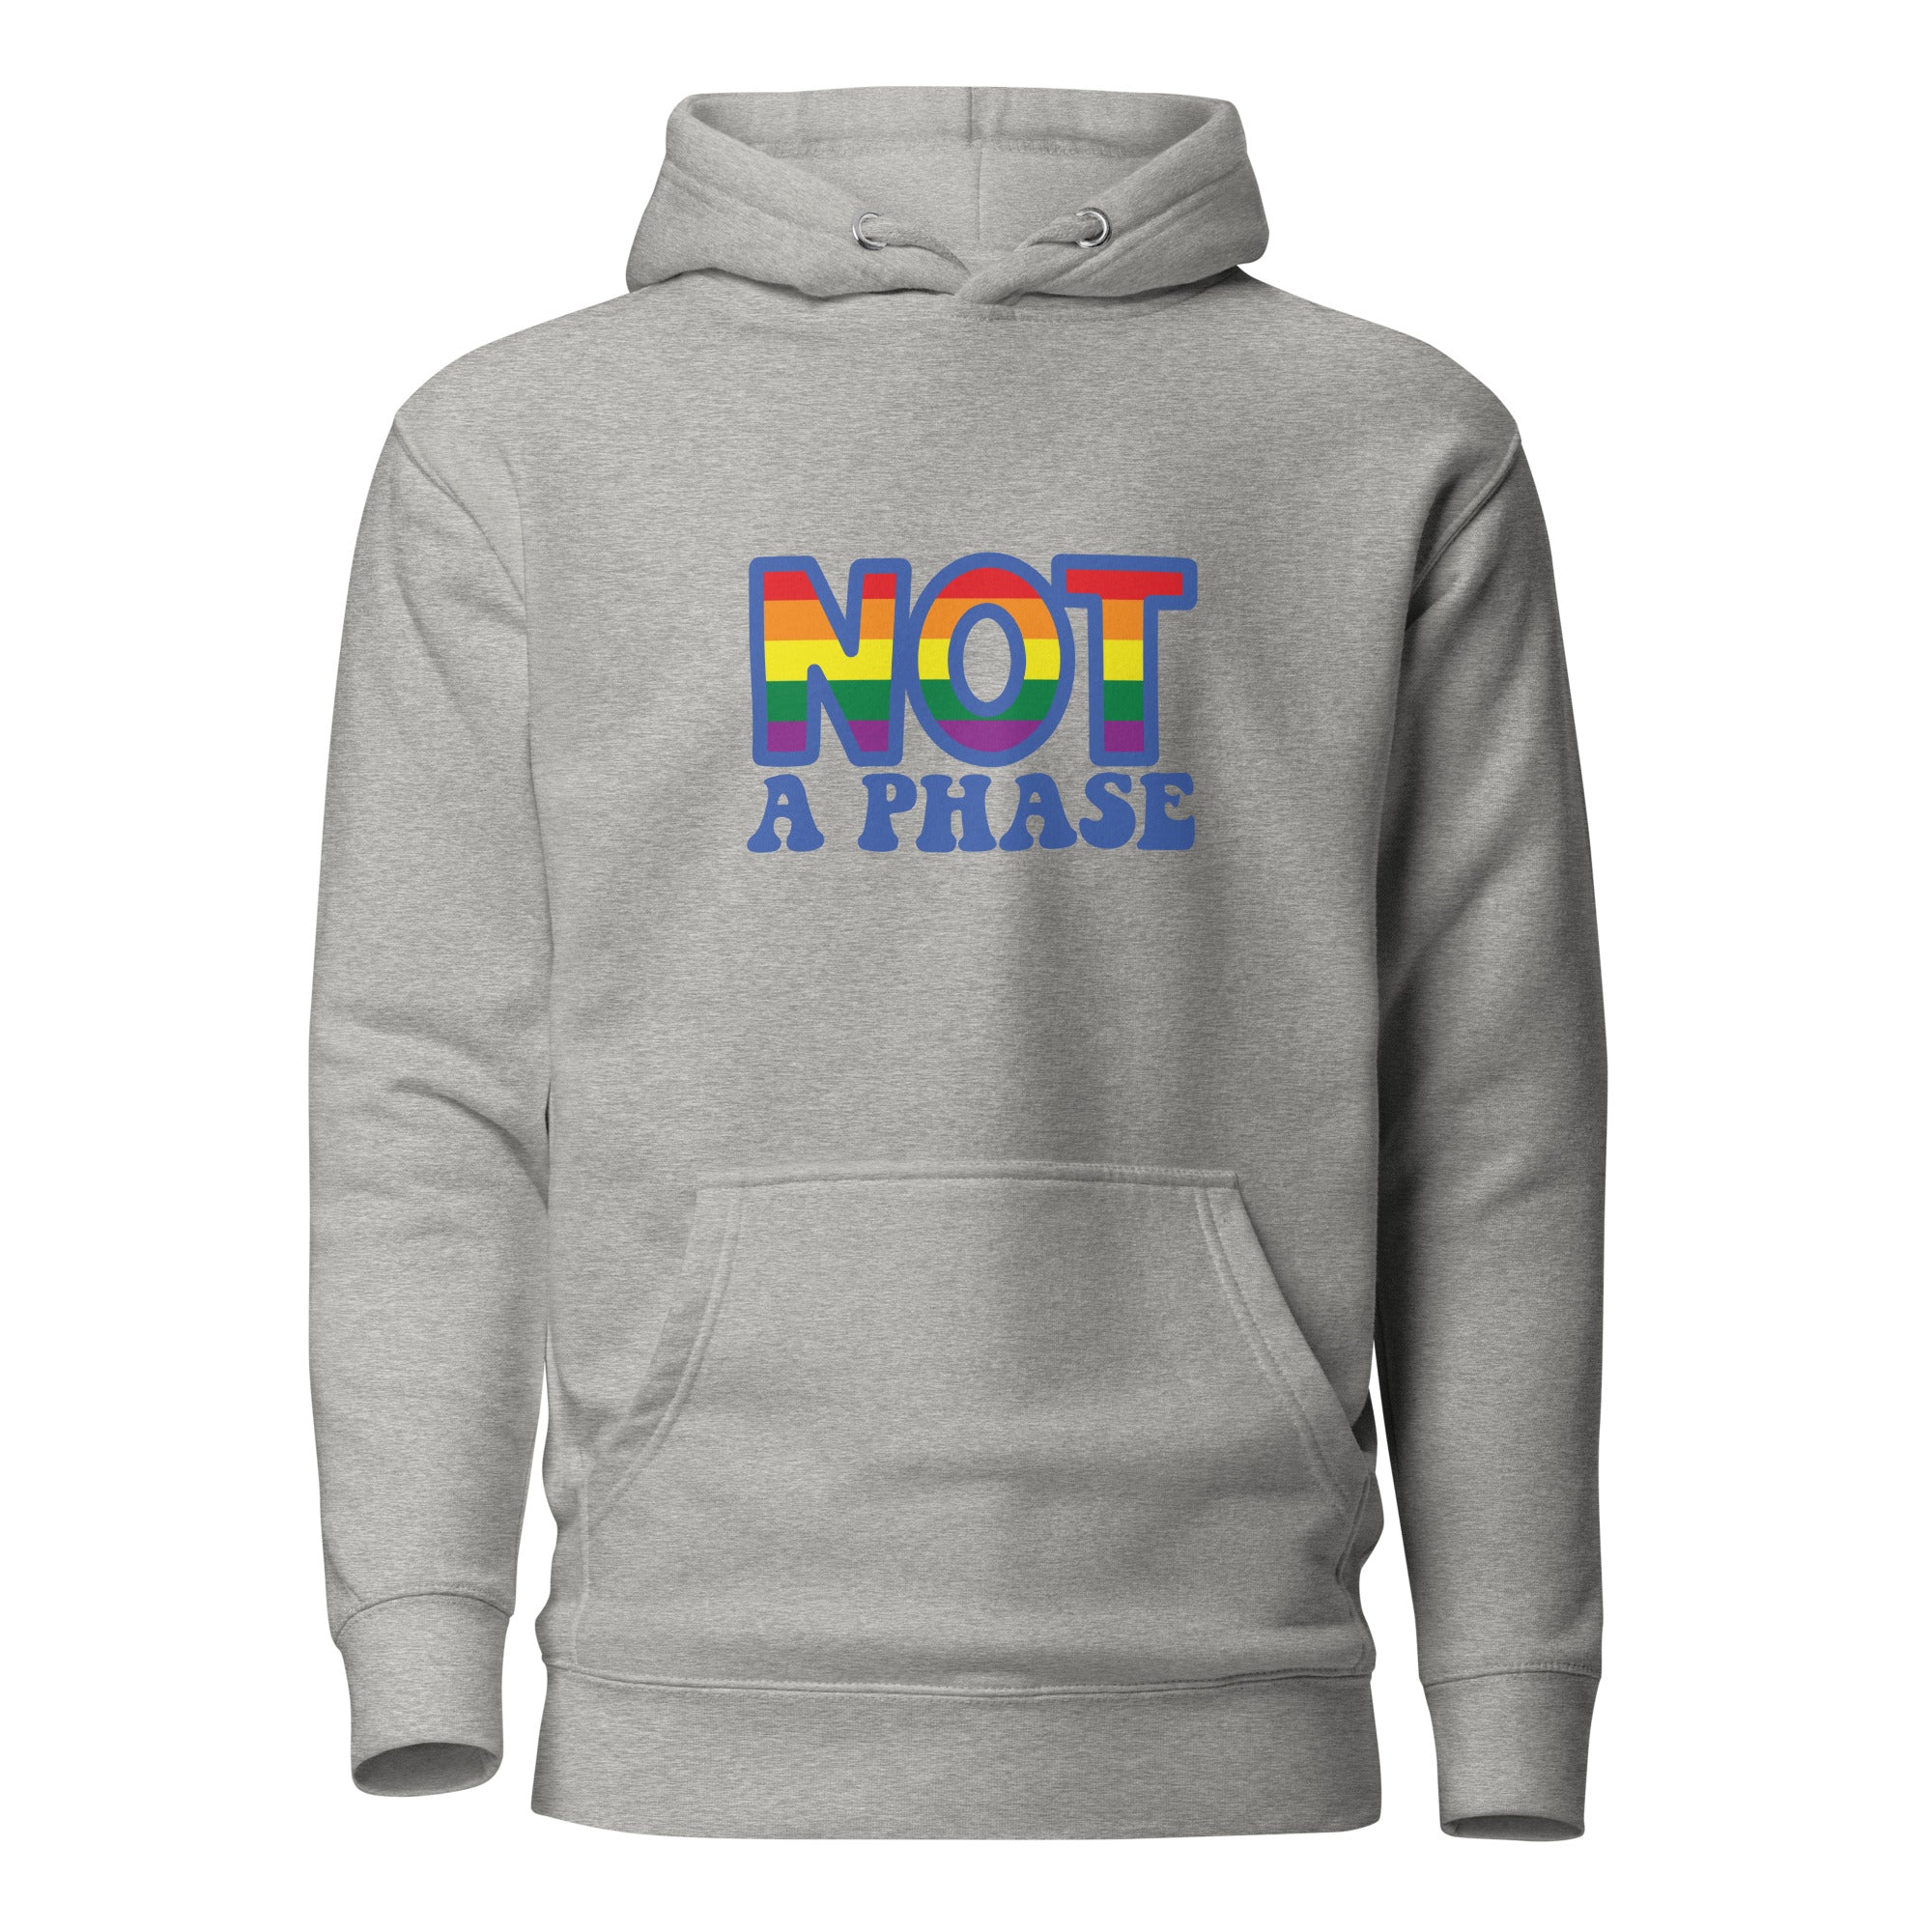 Unisex Hoodie- Not a phase